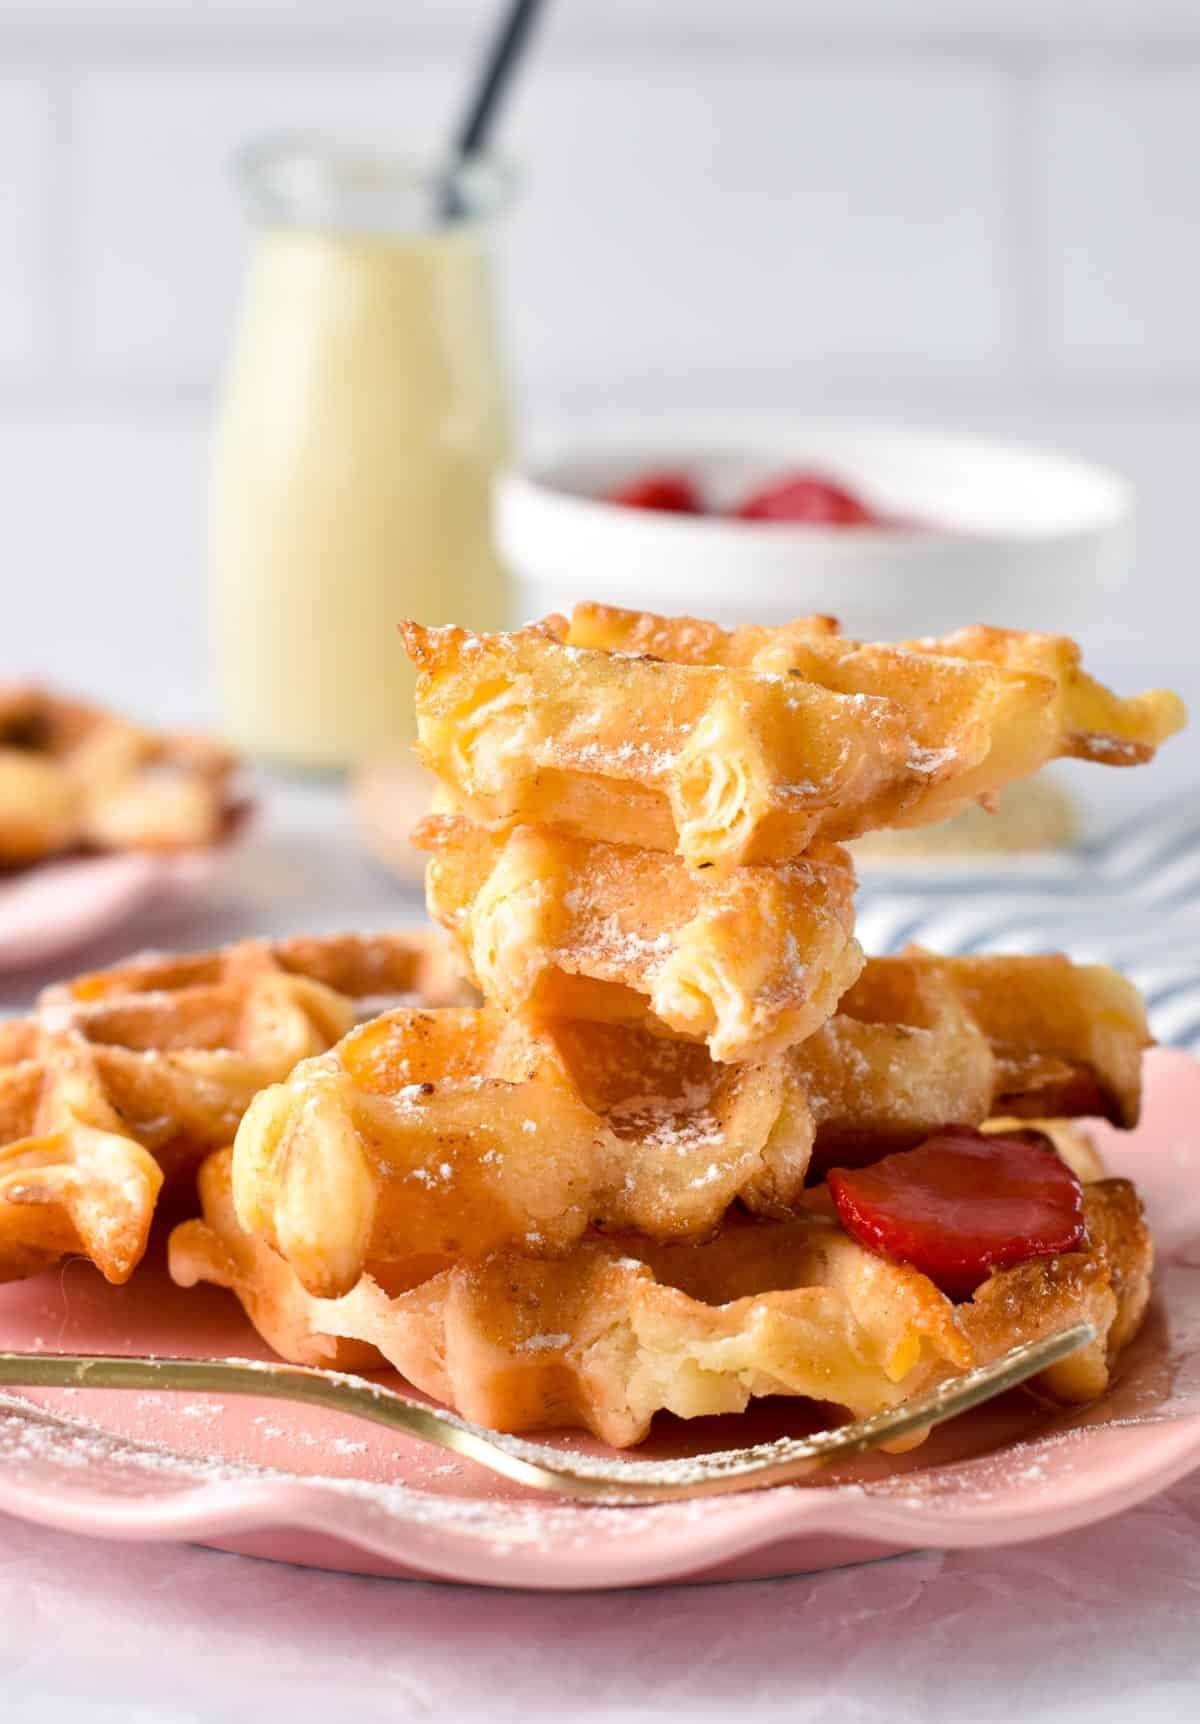 These Croffles also called croissant waffles are buttery sweet crispy waffles made with just two ingredients. If you are a waffle and a croissant lover for breakfast, this recipe is a must-try.